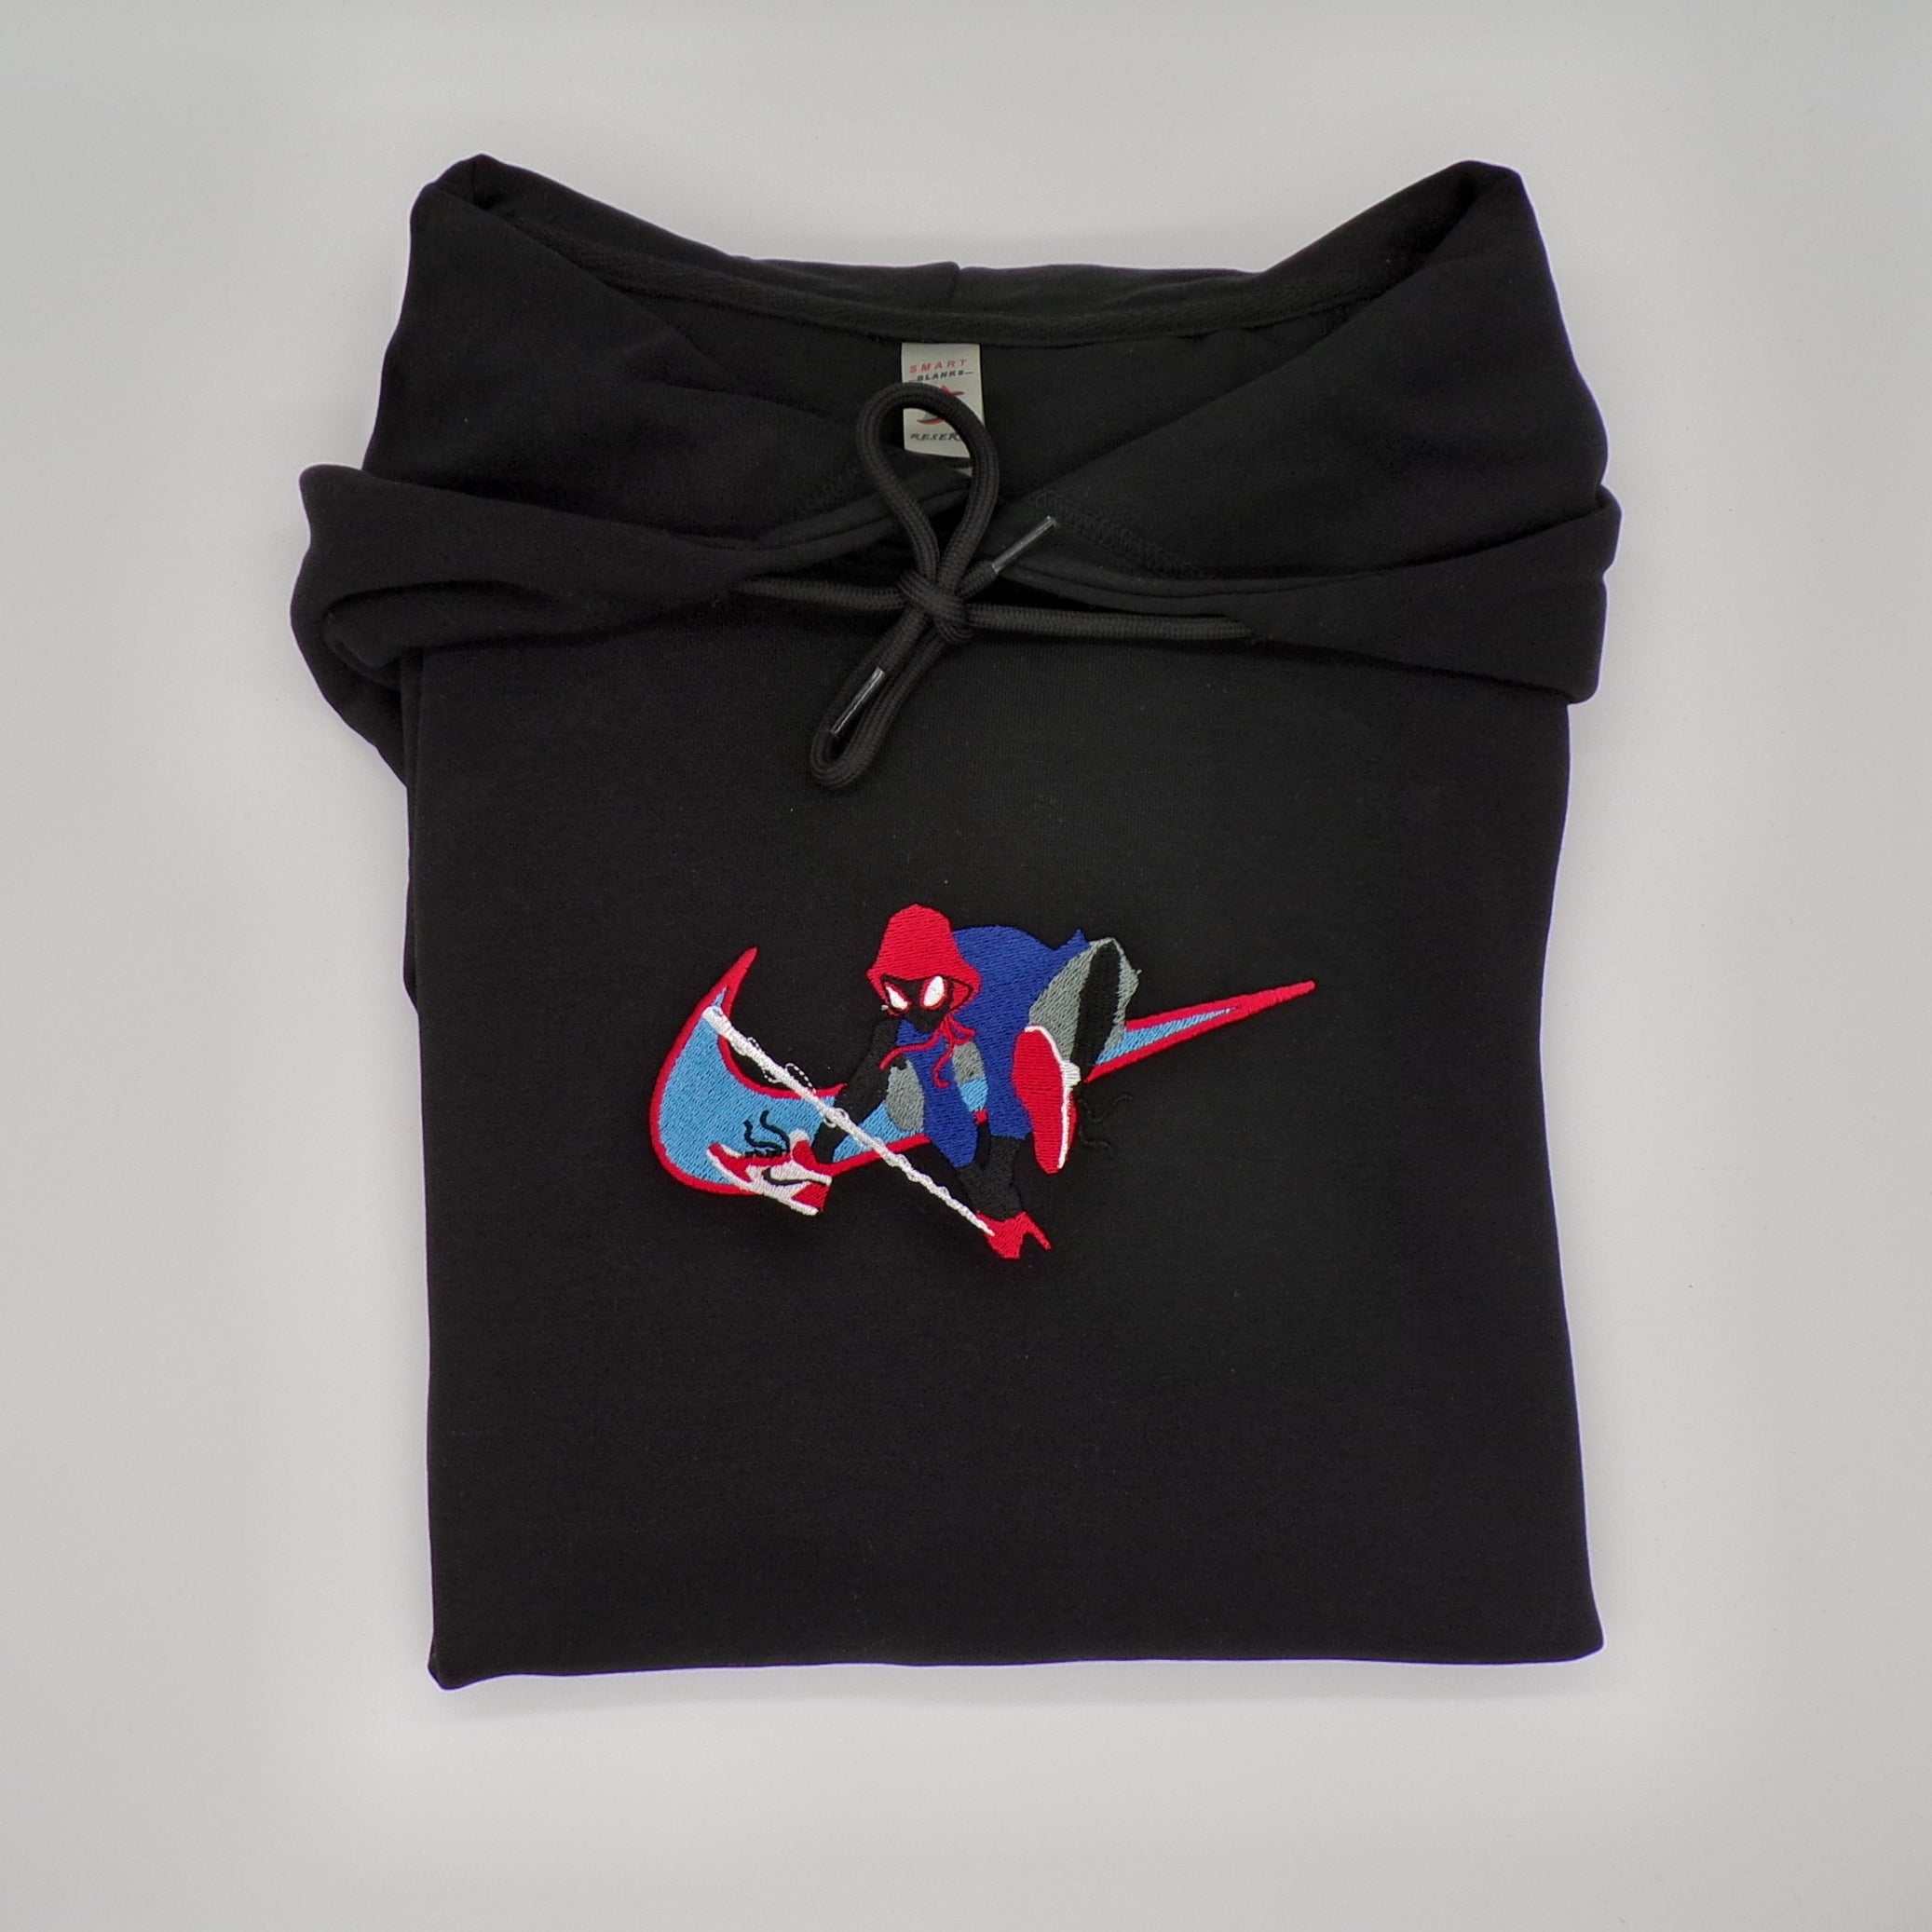 LIMITED SPIDERMAN EARTH 1610 X MILES MORALES EMBROIDERED HOODIE